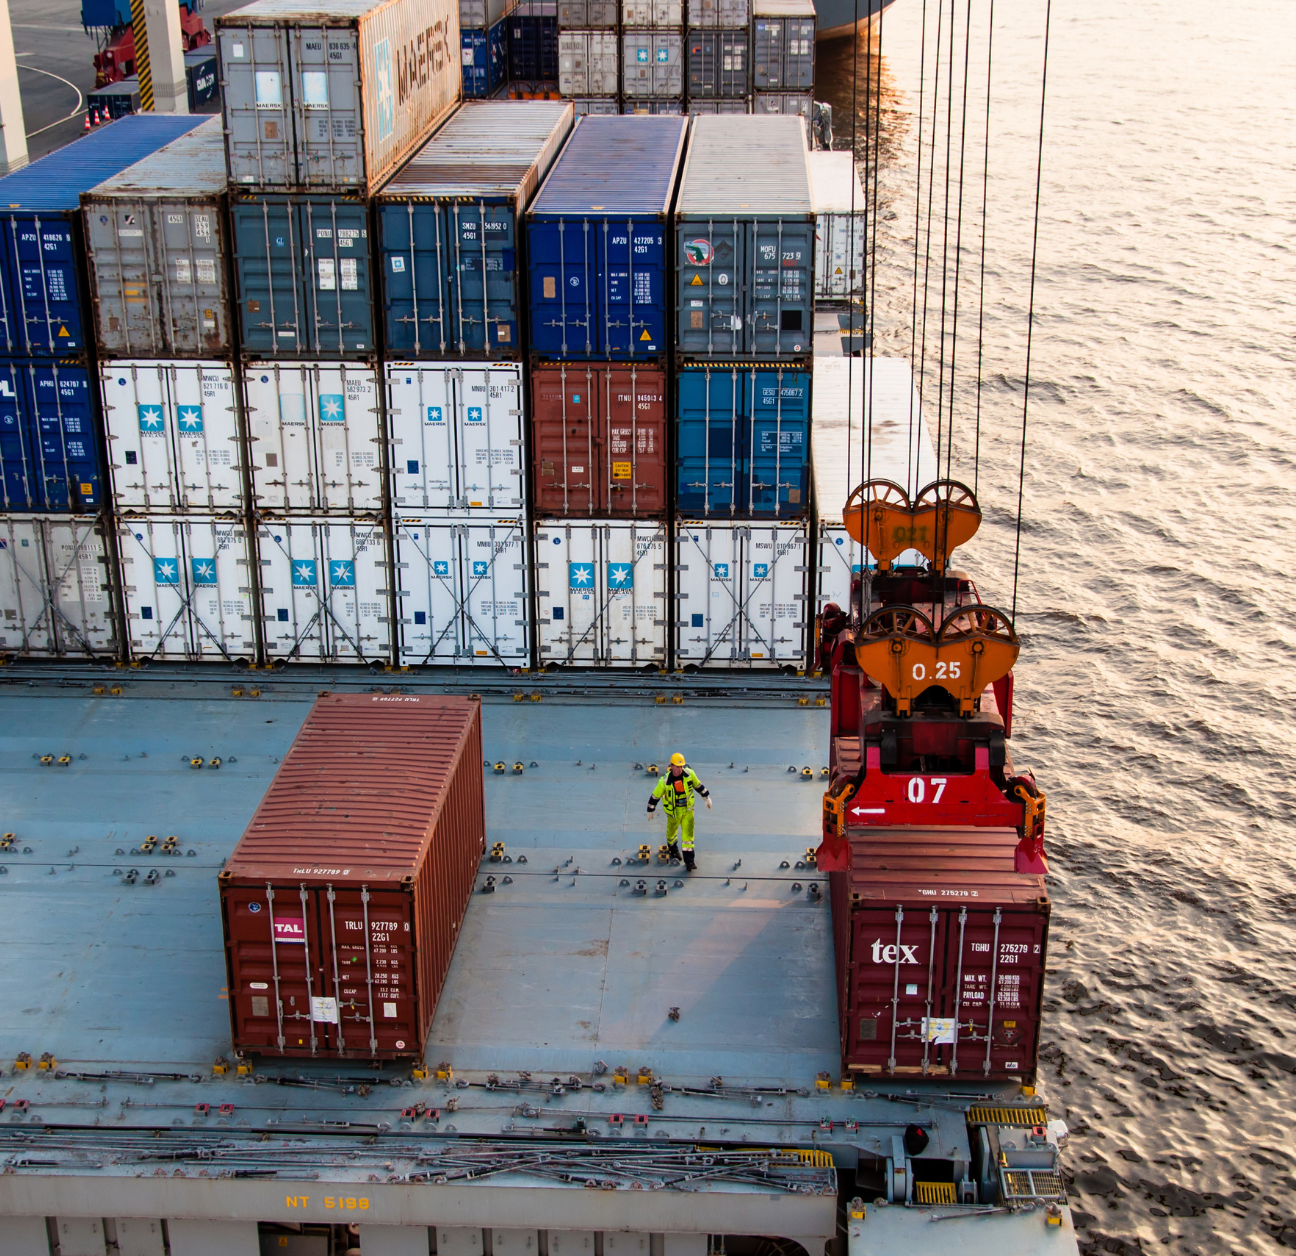 Containers being monitored with visibility tracking software, like FourKites. 